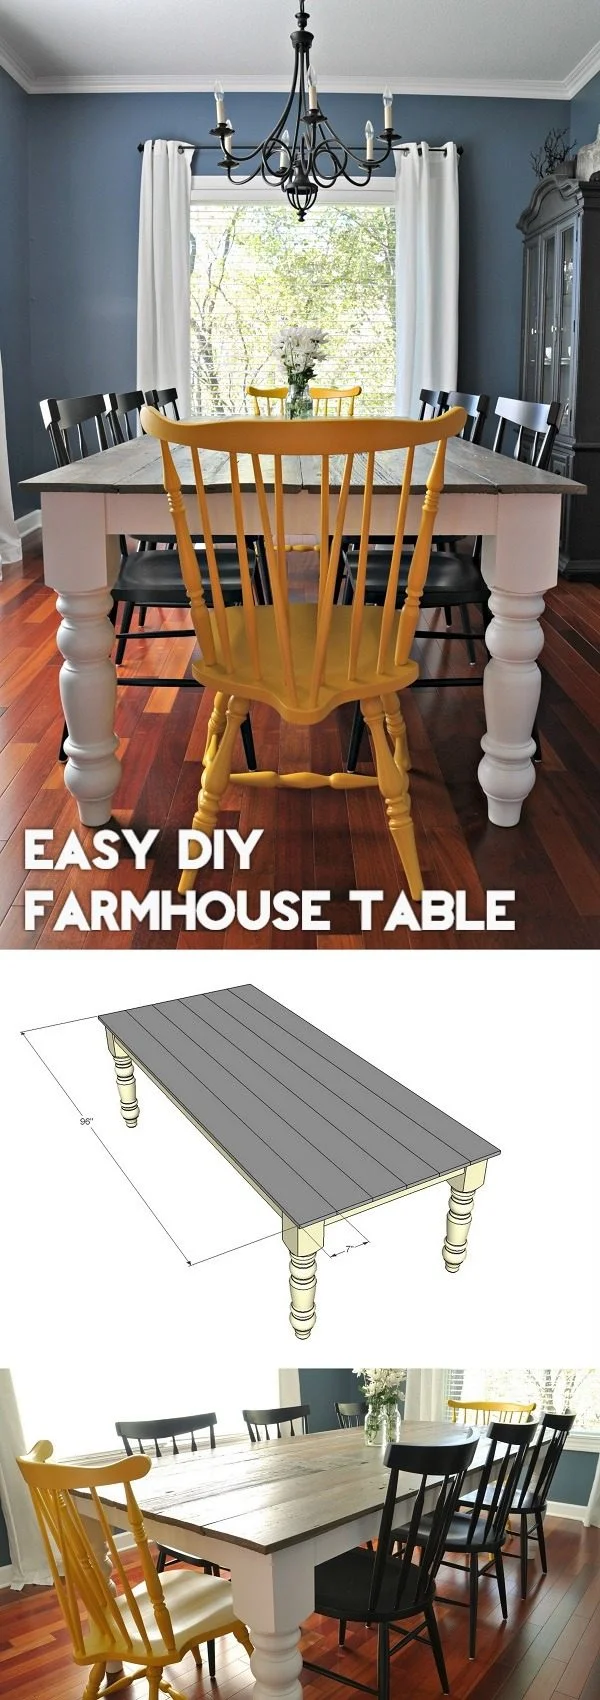 Check out the tutorial how to build an easy   dining table  